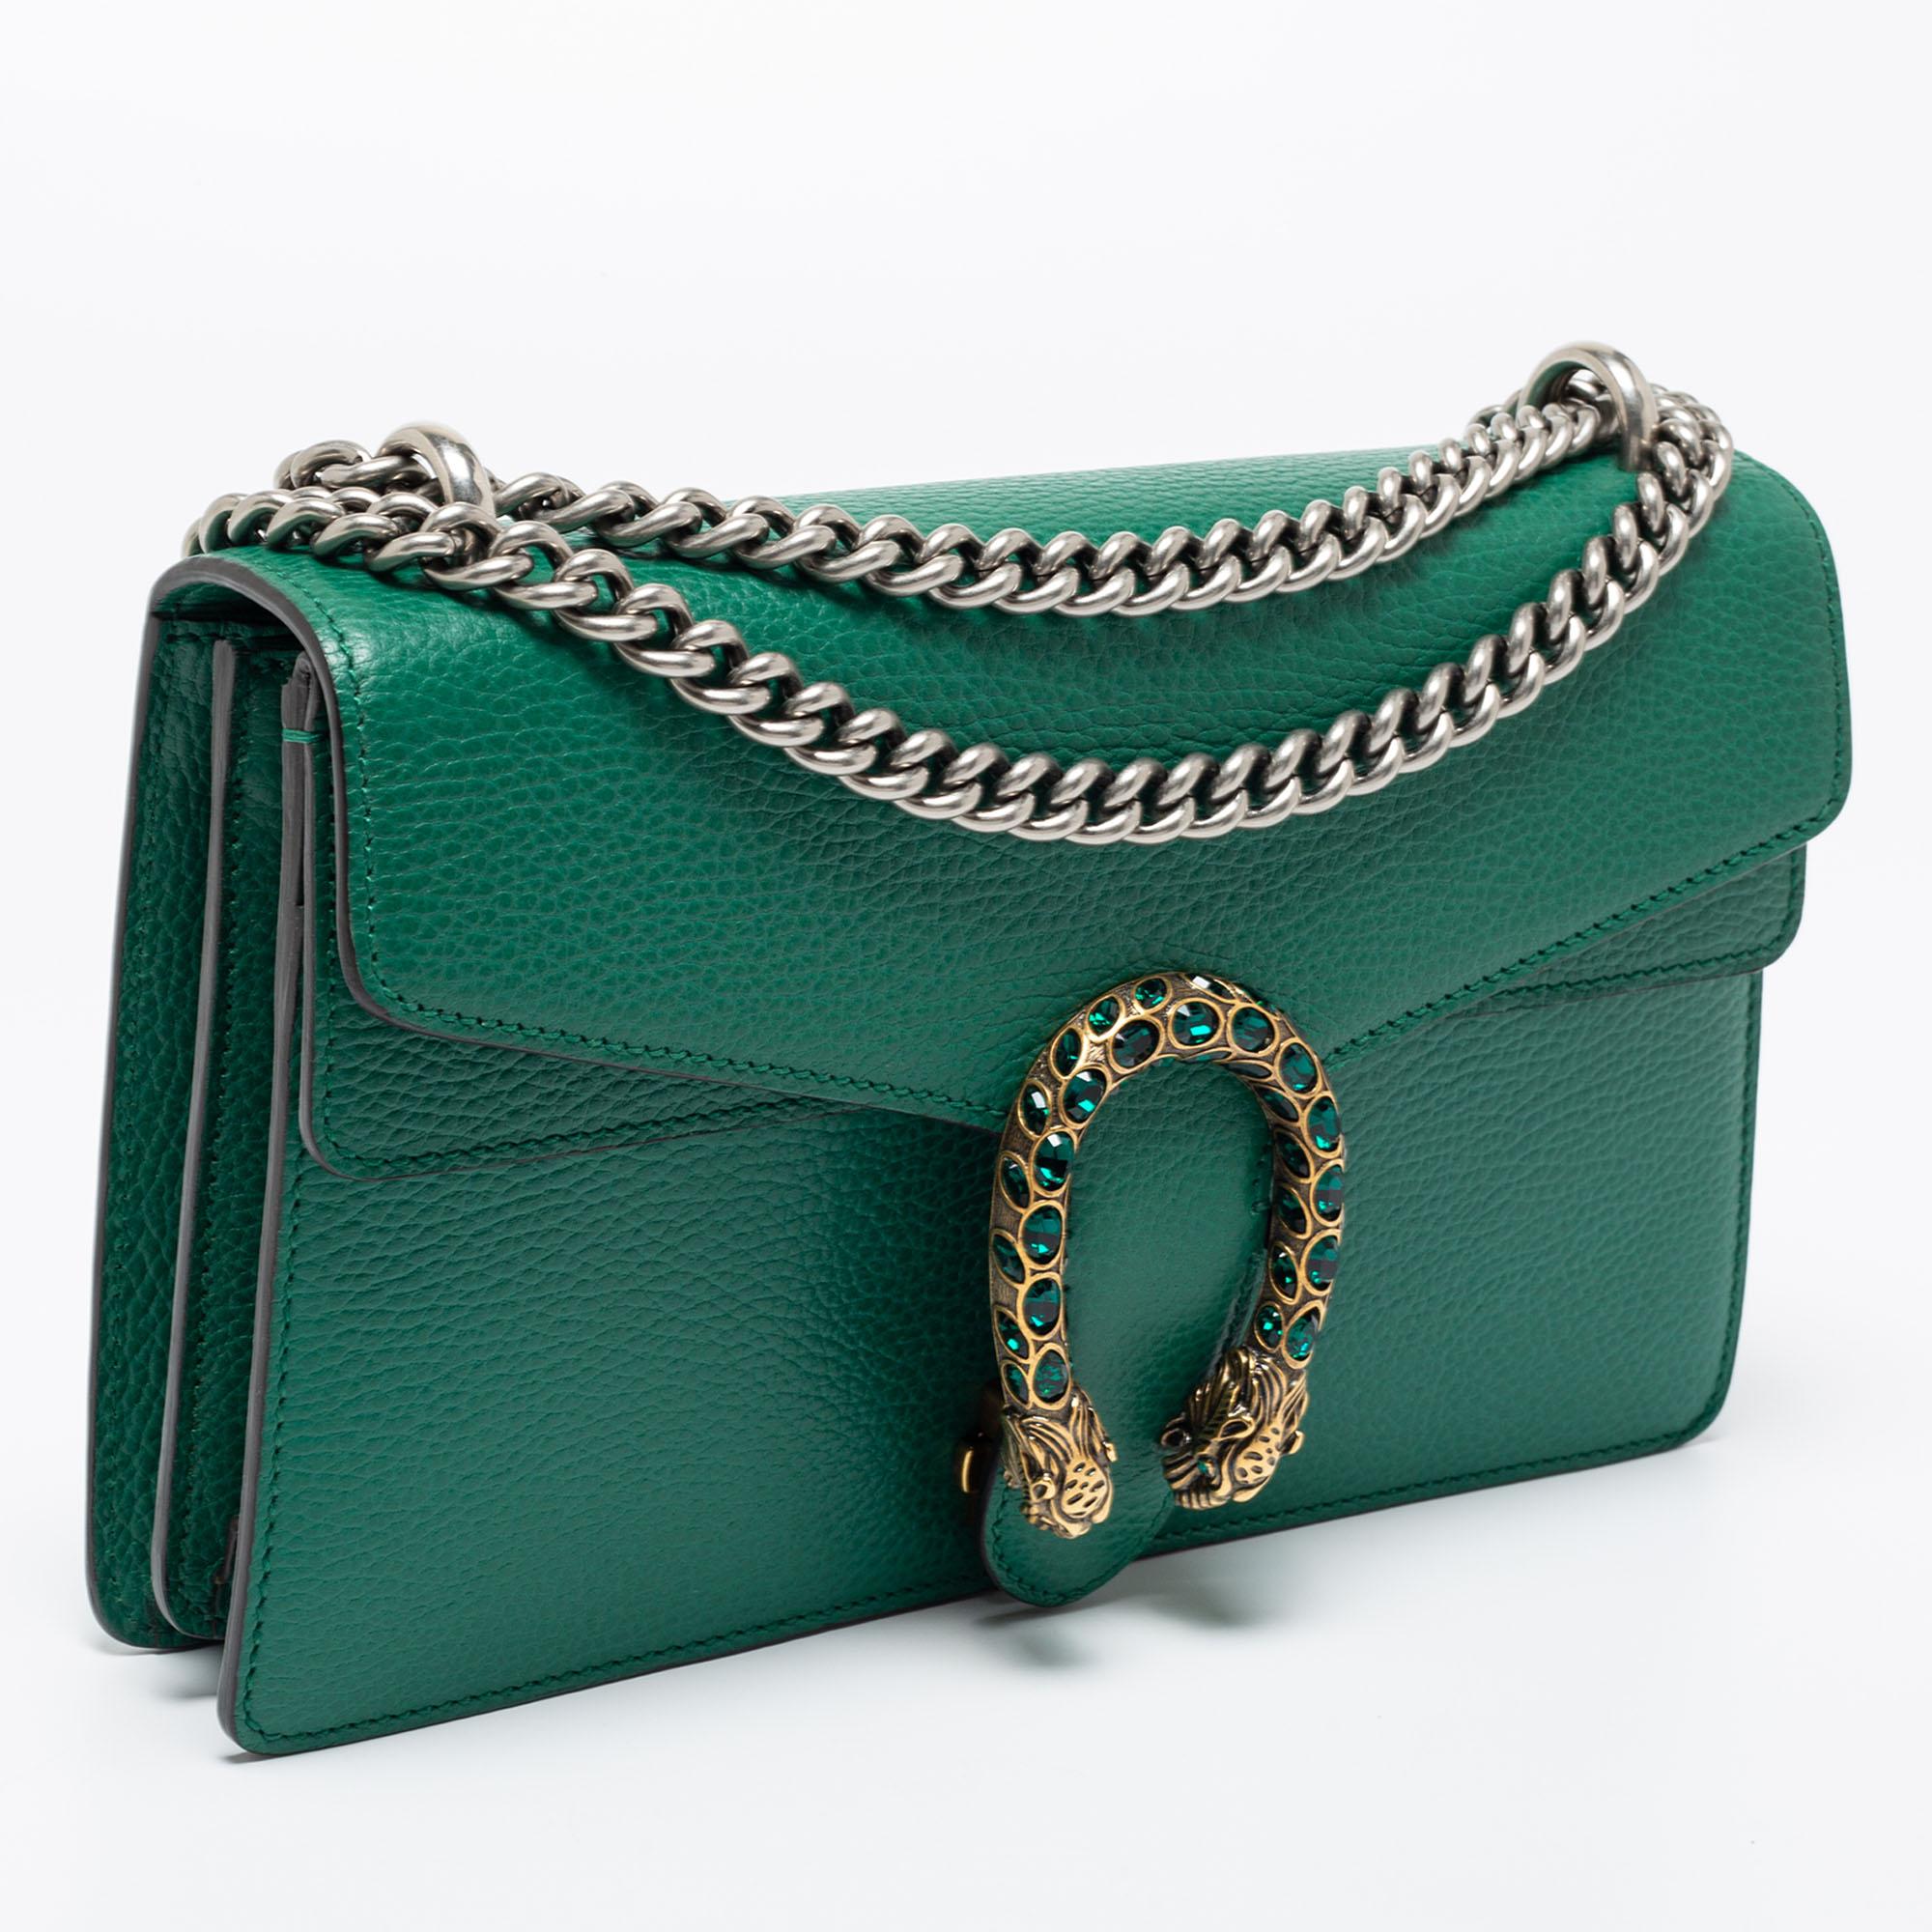 Women's Gucci Green Leather Small Dionysus Shoulder bag